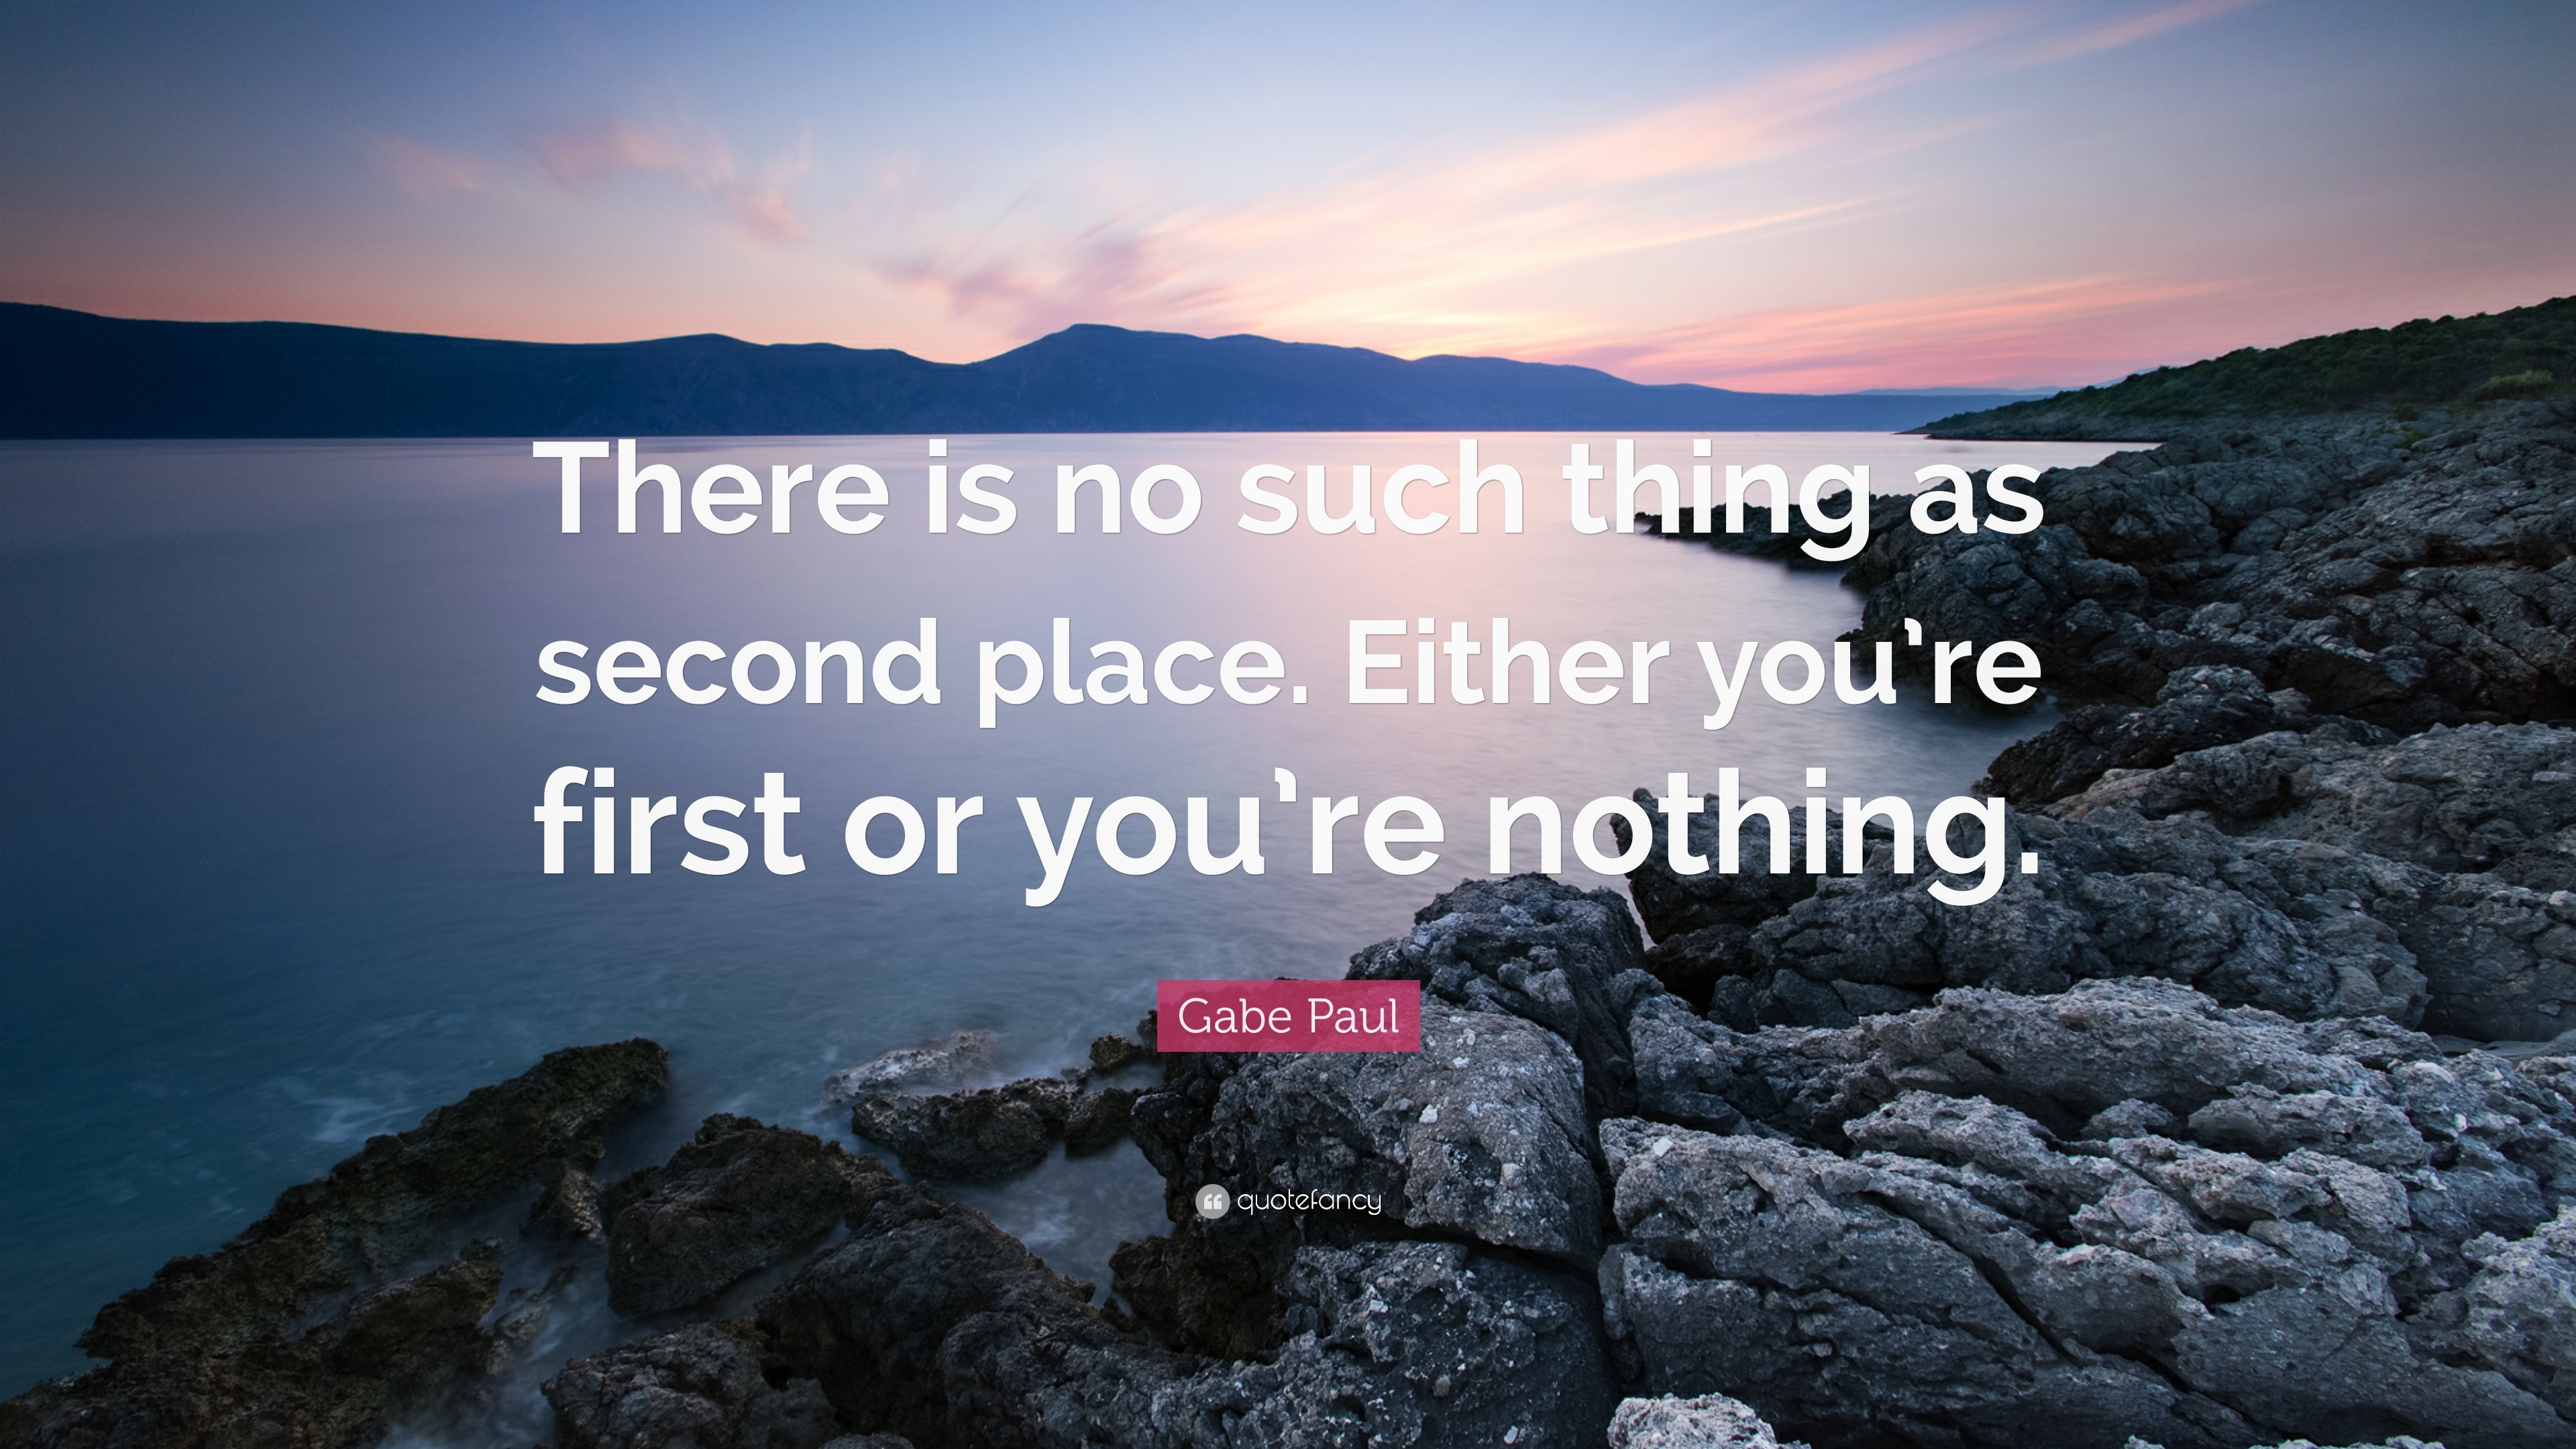 Gabe Paul Quote There Is No Such Thing As Second Place Either You Re First Or